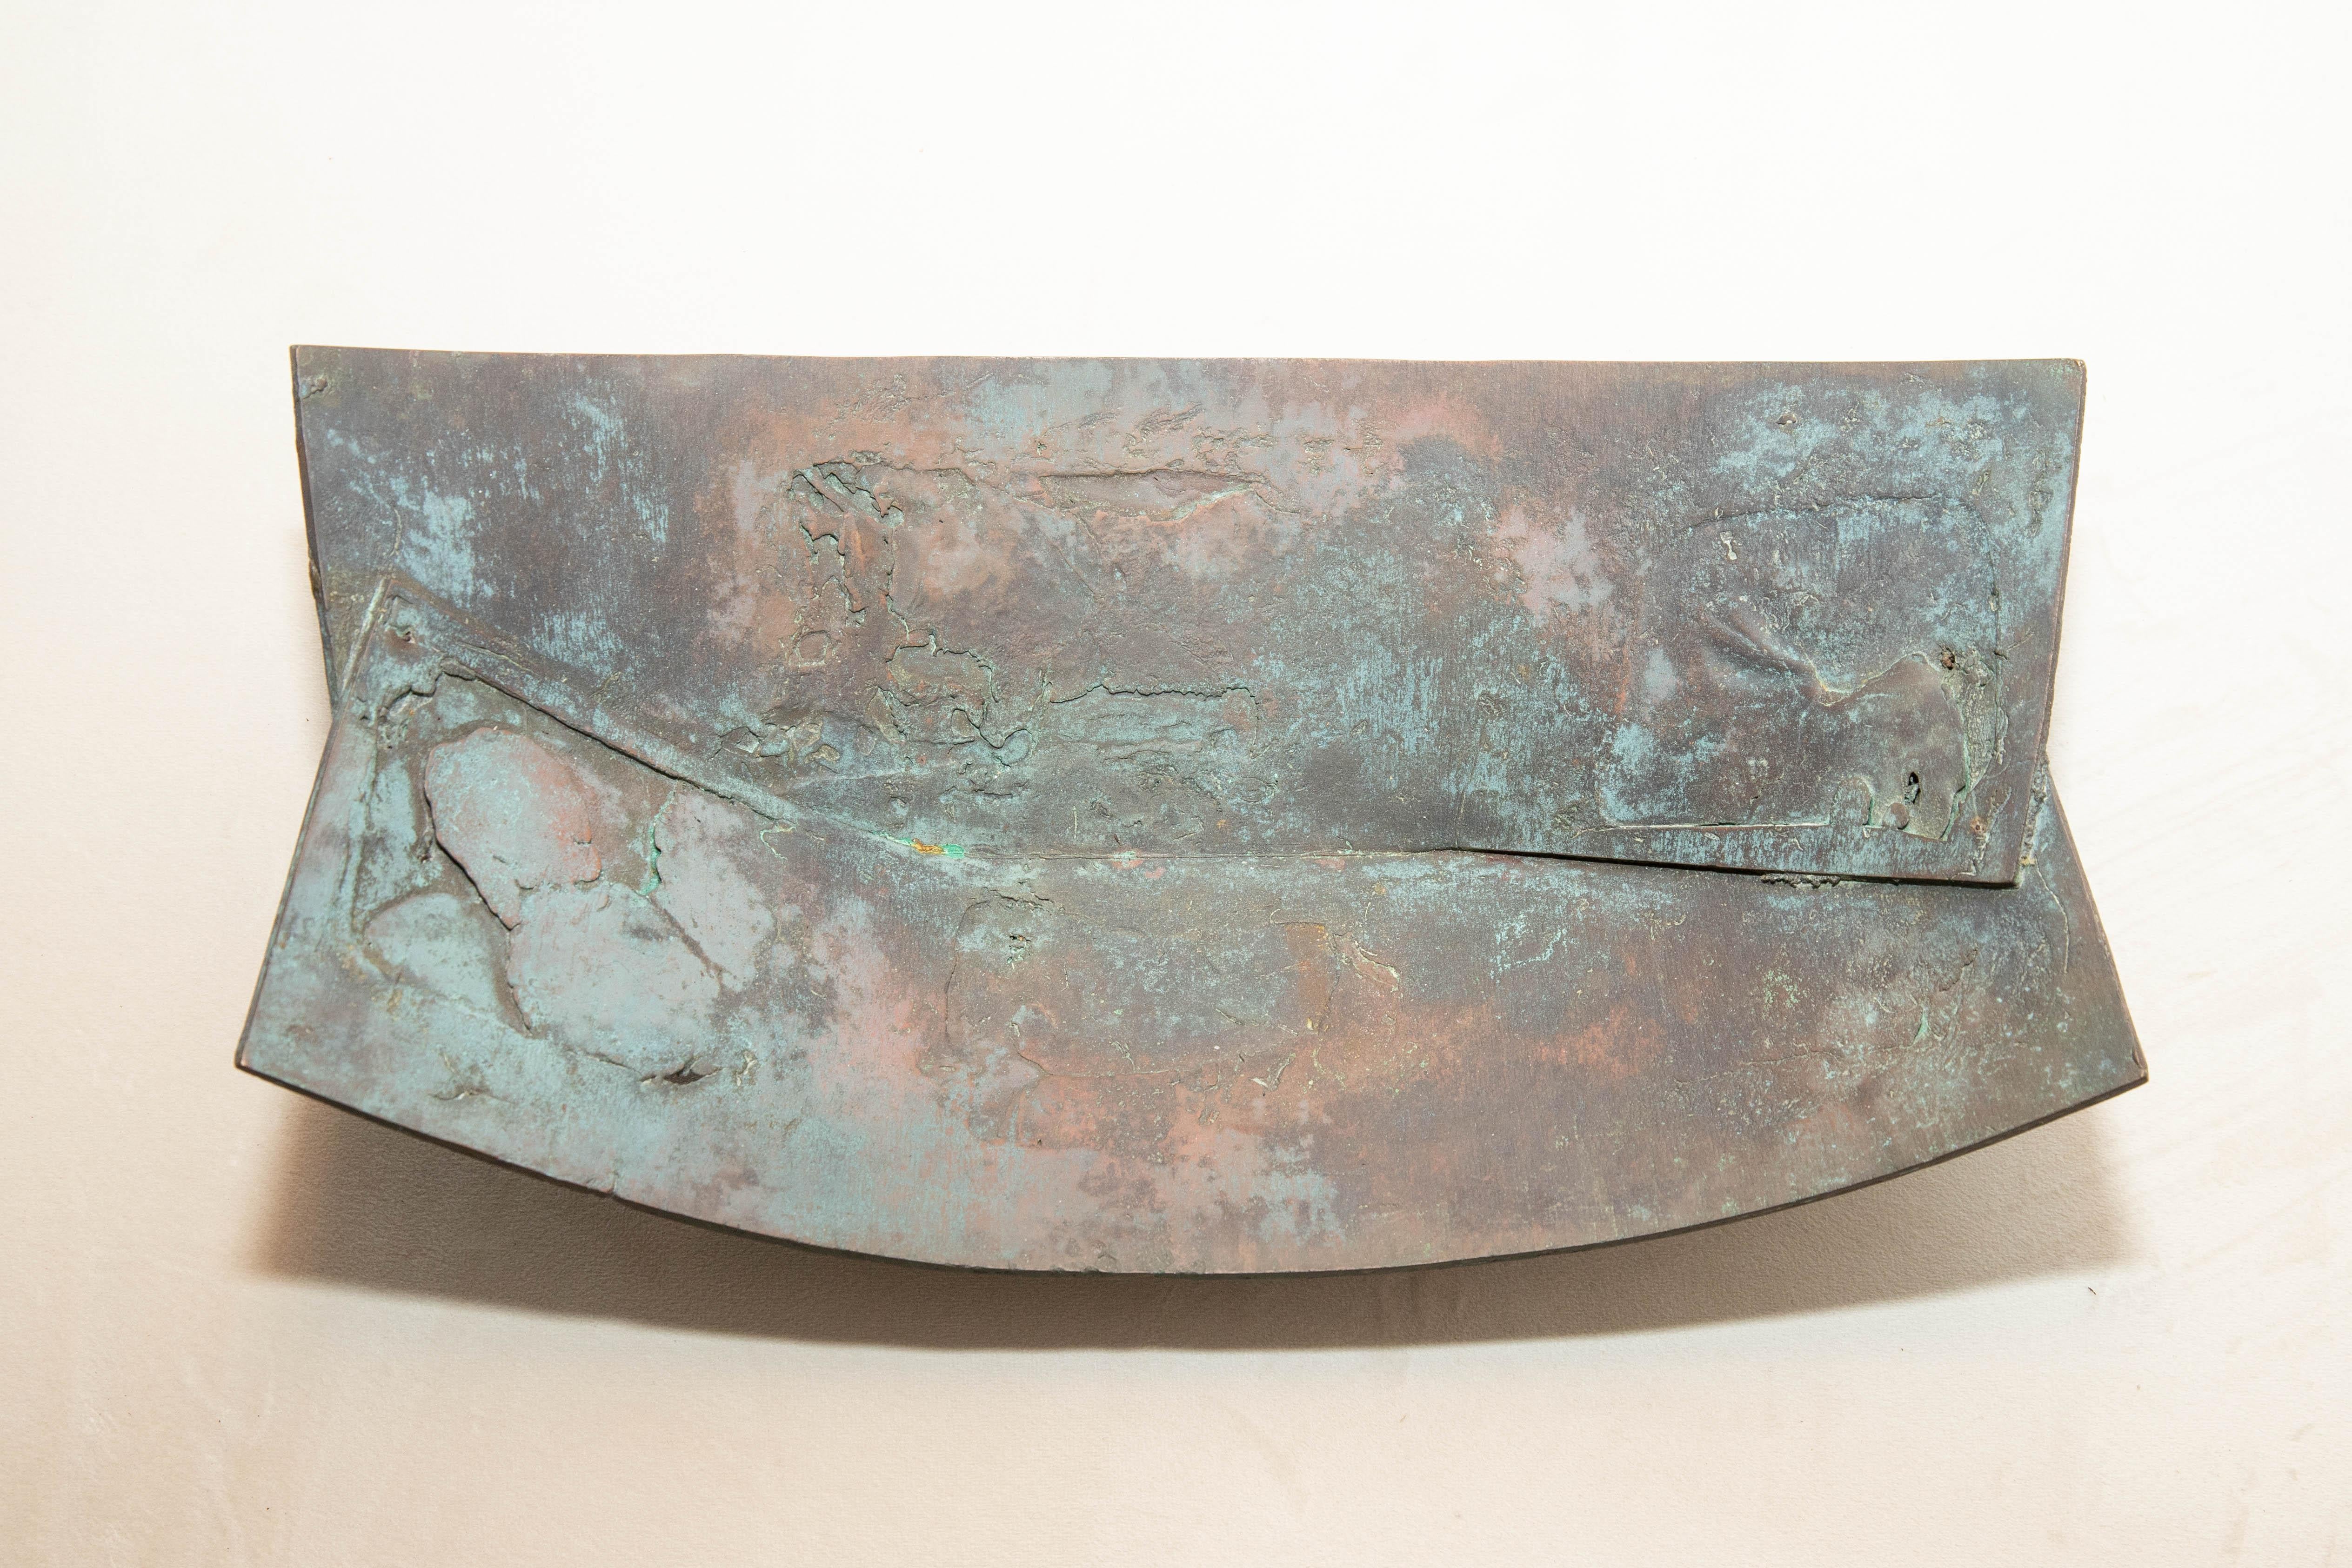 Mission Sculptural Patinated Iron Bowl For Sale